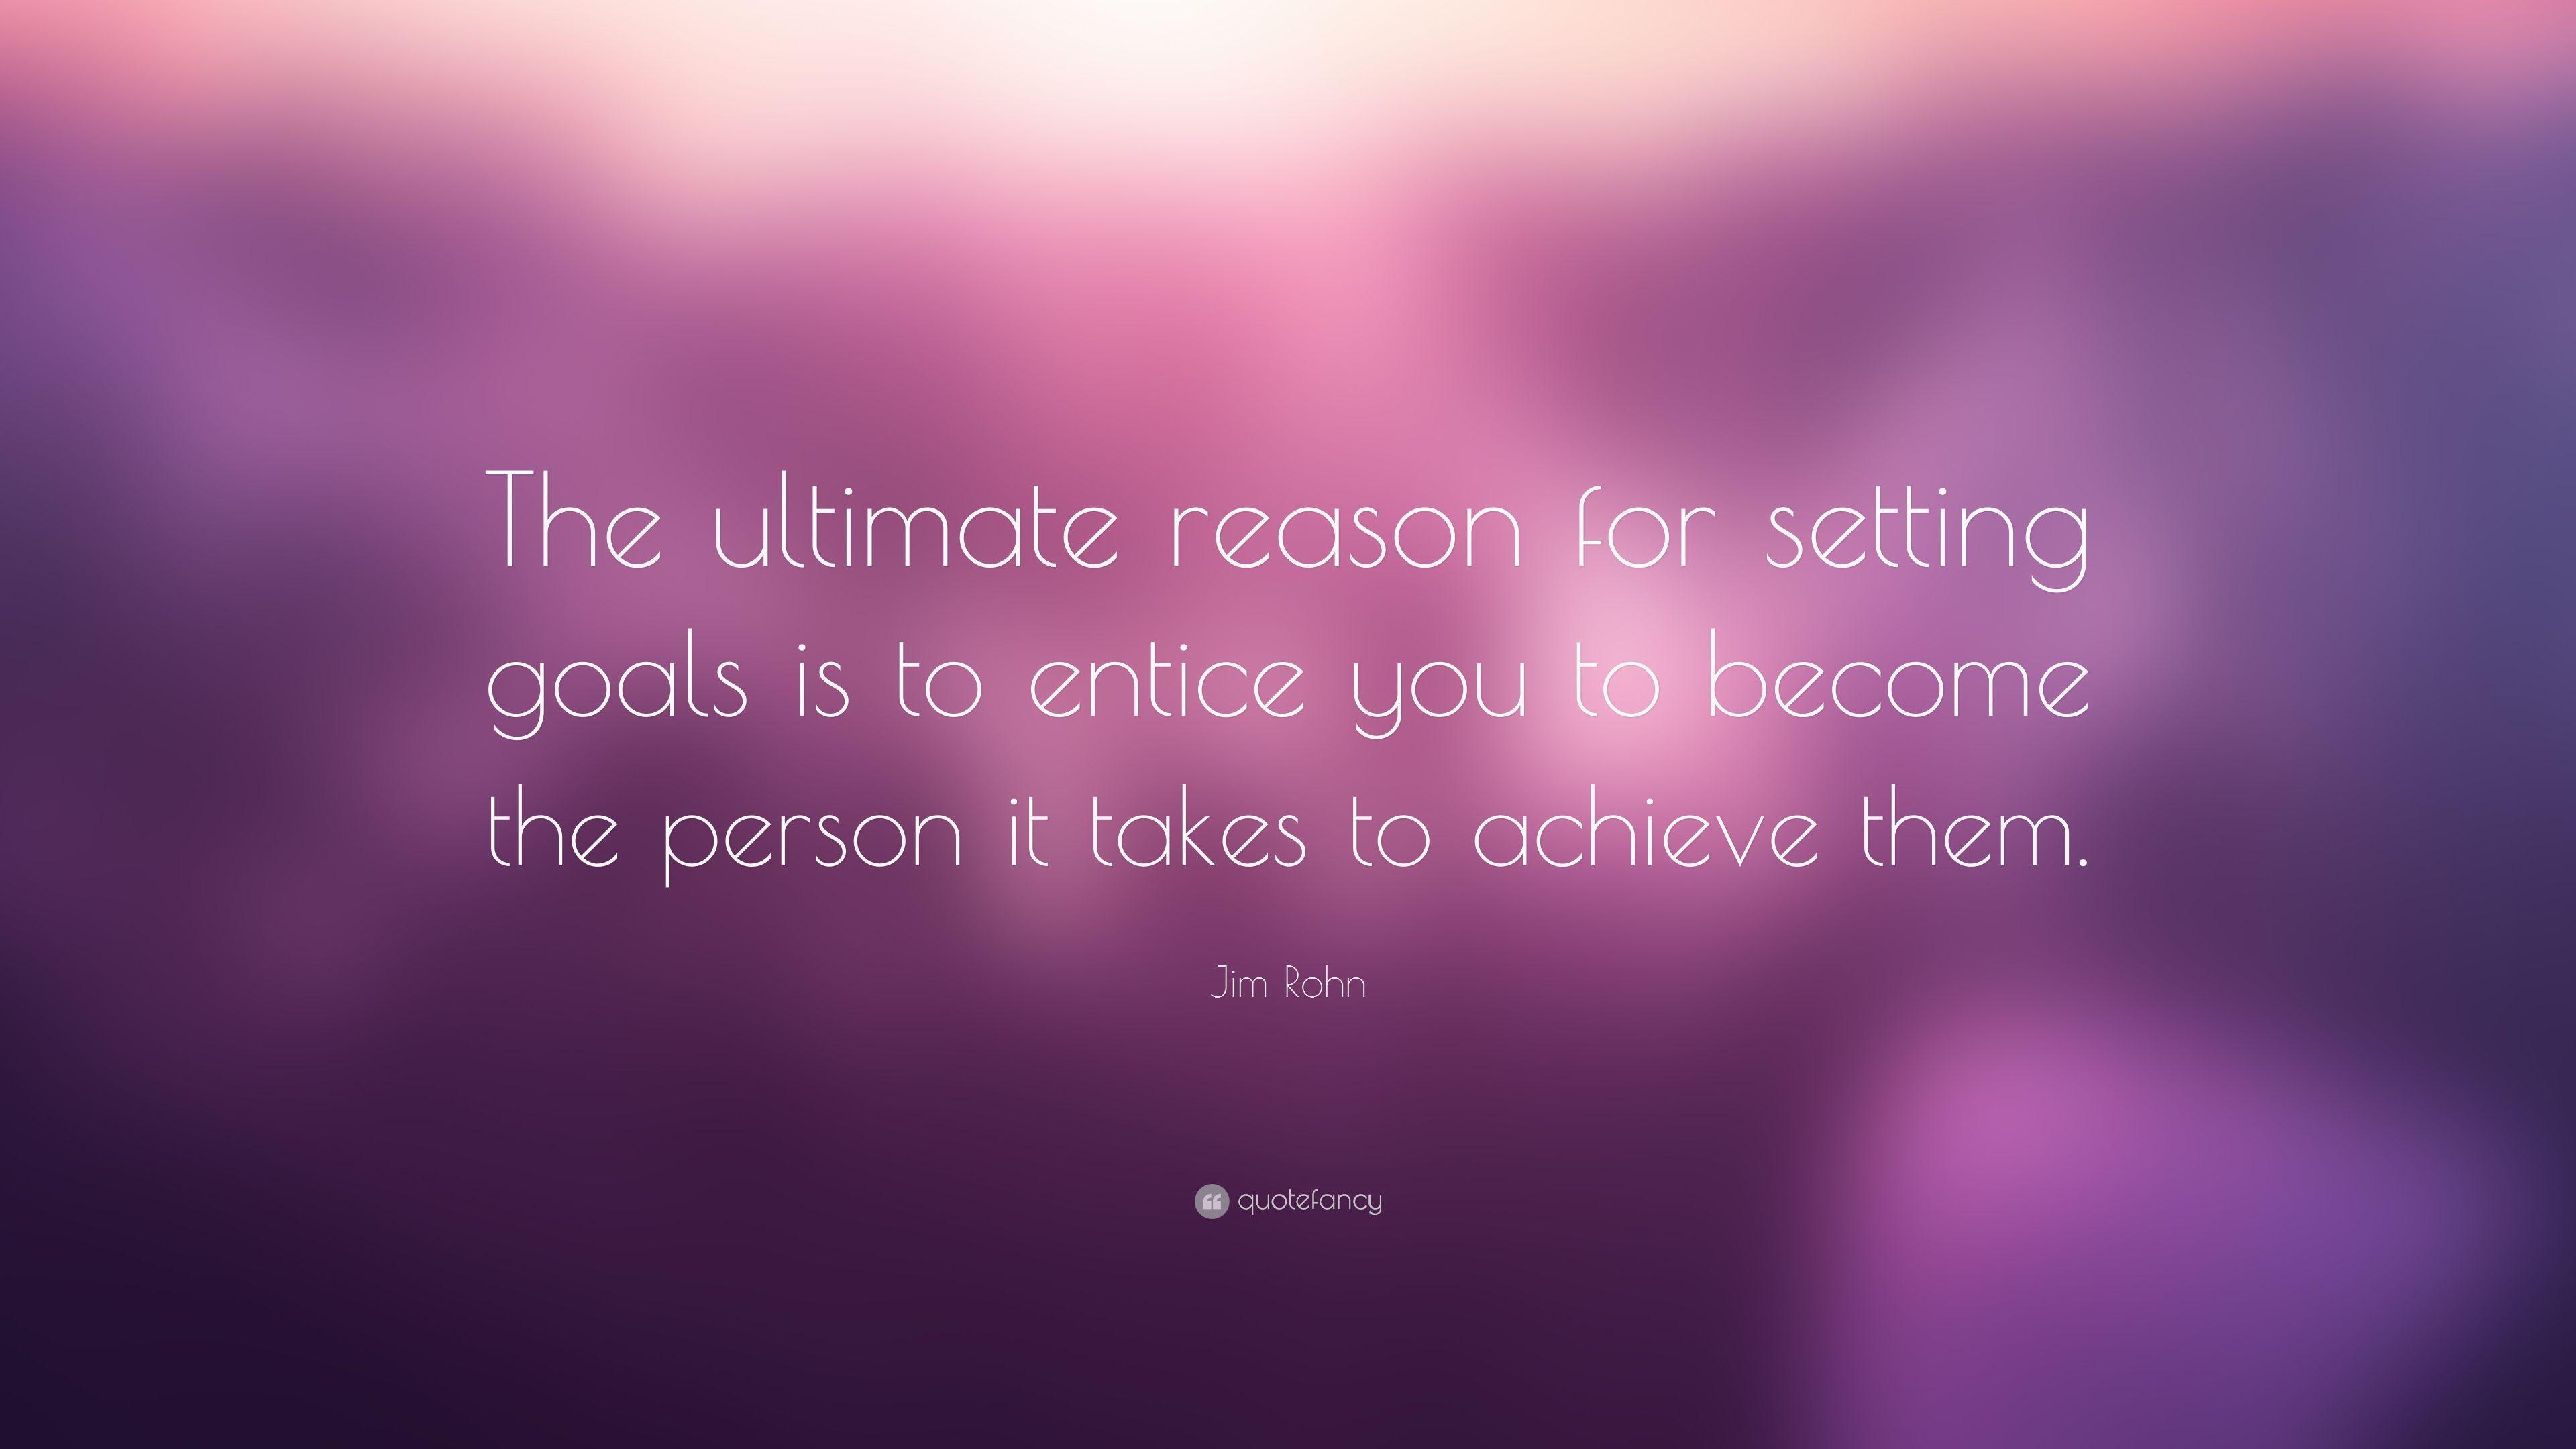 Jim Rohn Quote: “The ultimate reason for setting goals is to